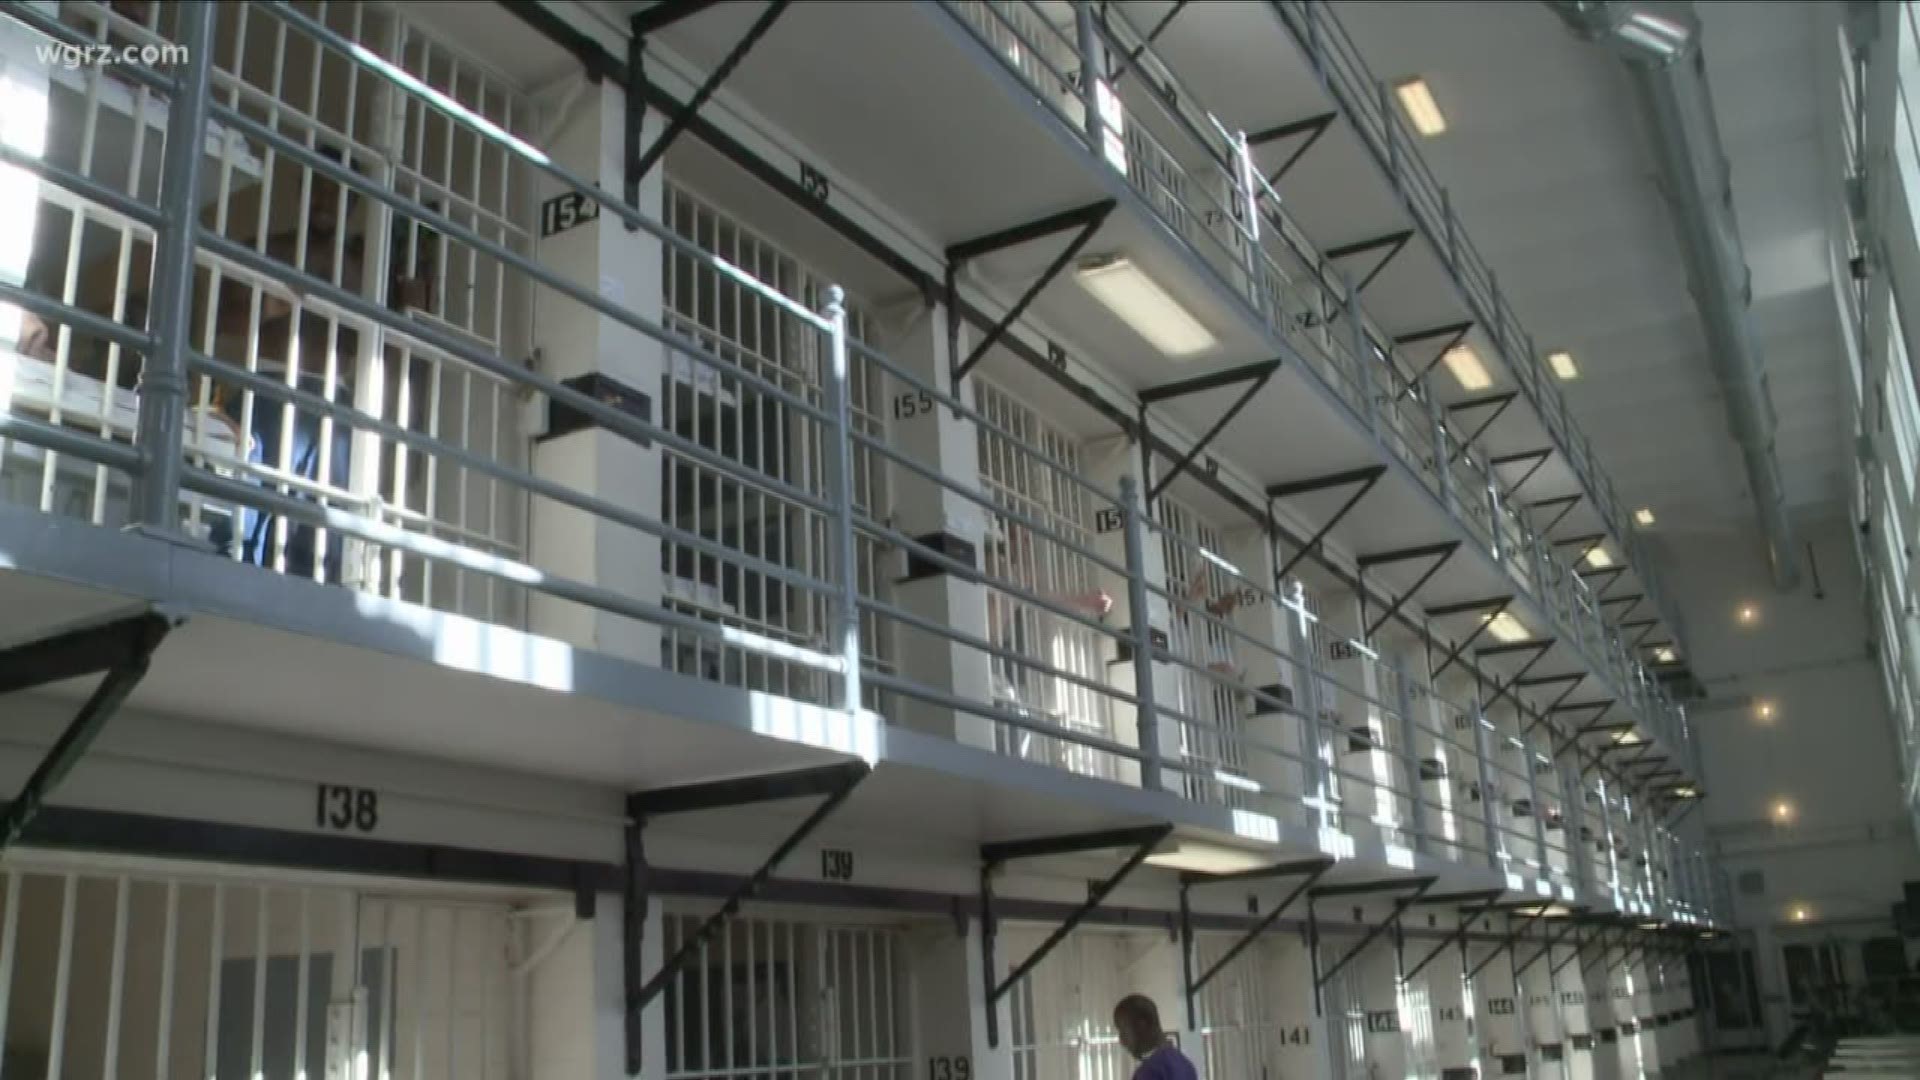 The state is giving inmates a limited number of free stamps, video and phone calls to make up for not being able to see people in person.